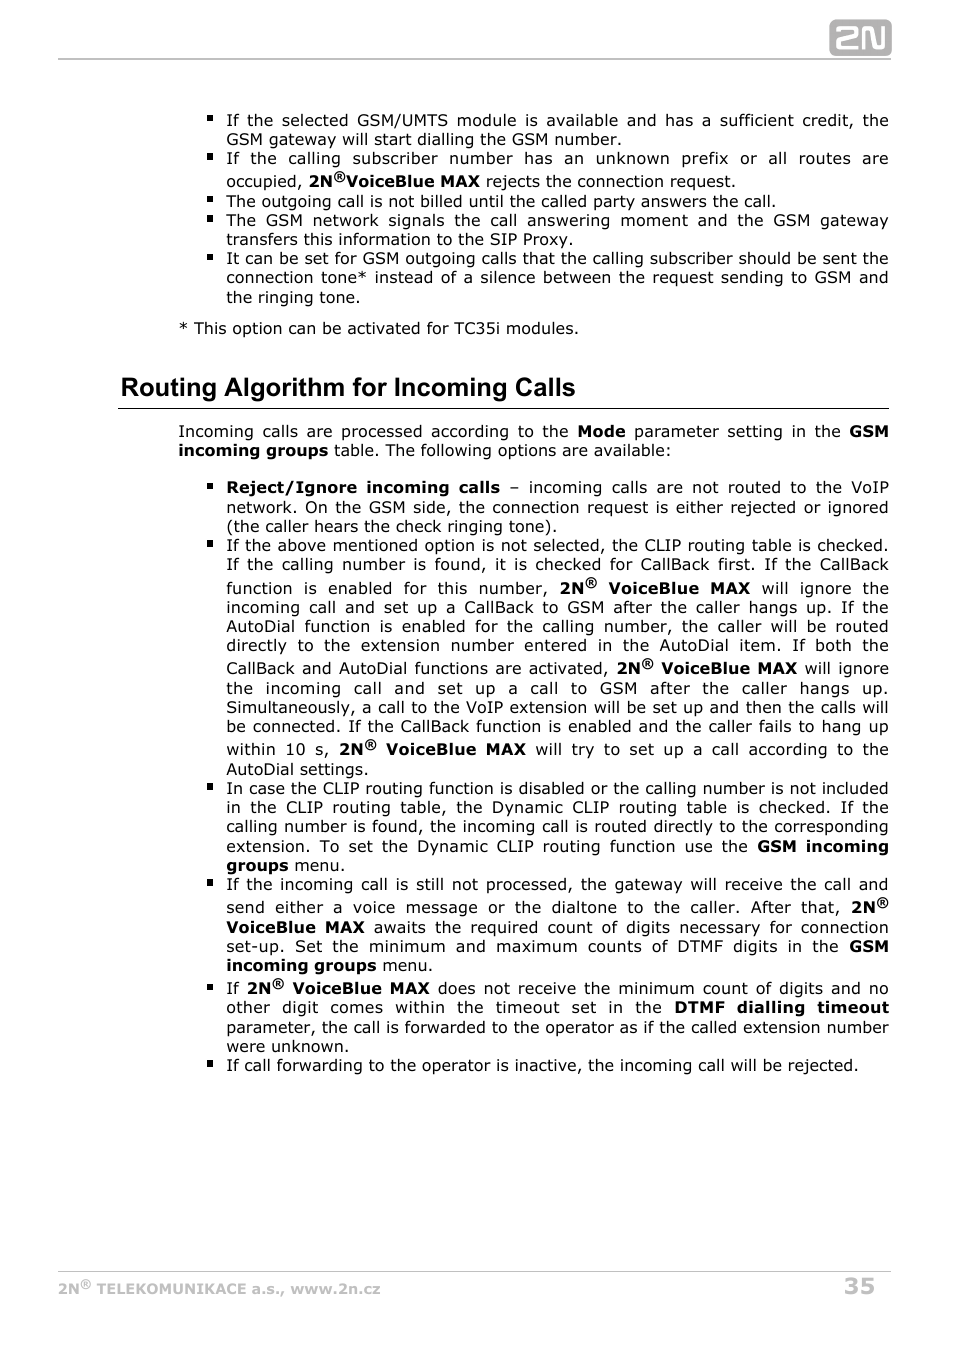 Routing algorithm for incoming calls | 2N VoiceBlue MAX v1.3 User Manual | Page 35 / 107